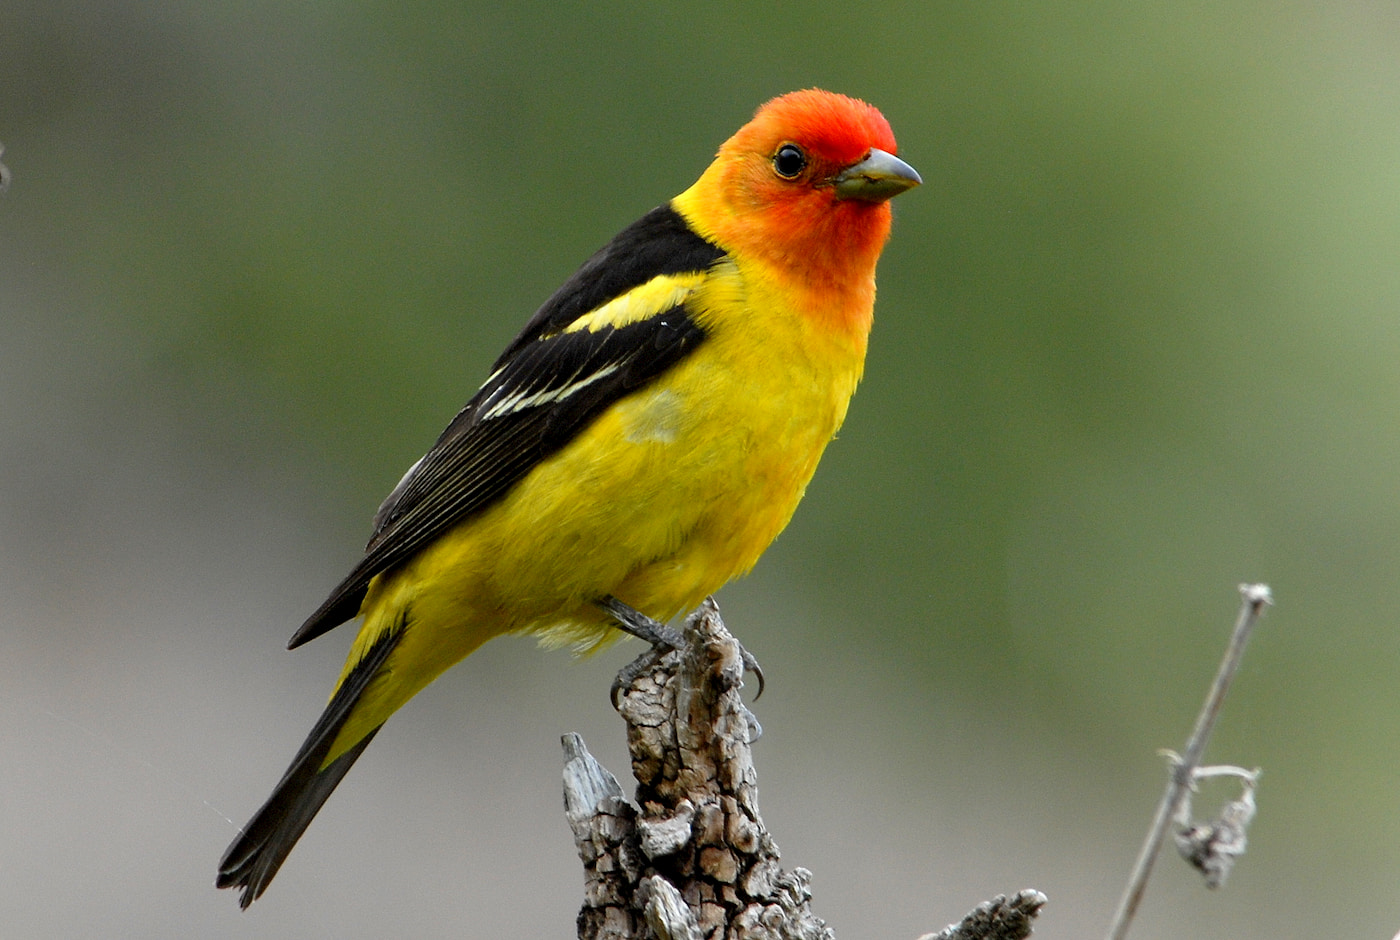 Western Tanager. Photo courtesy of US Fish & Wildlife Service, Pacific Southwest Region, Flickr Creative Commons.